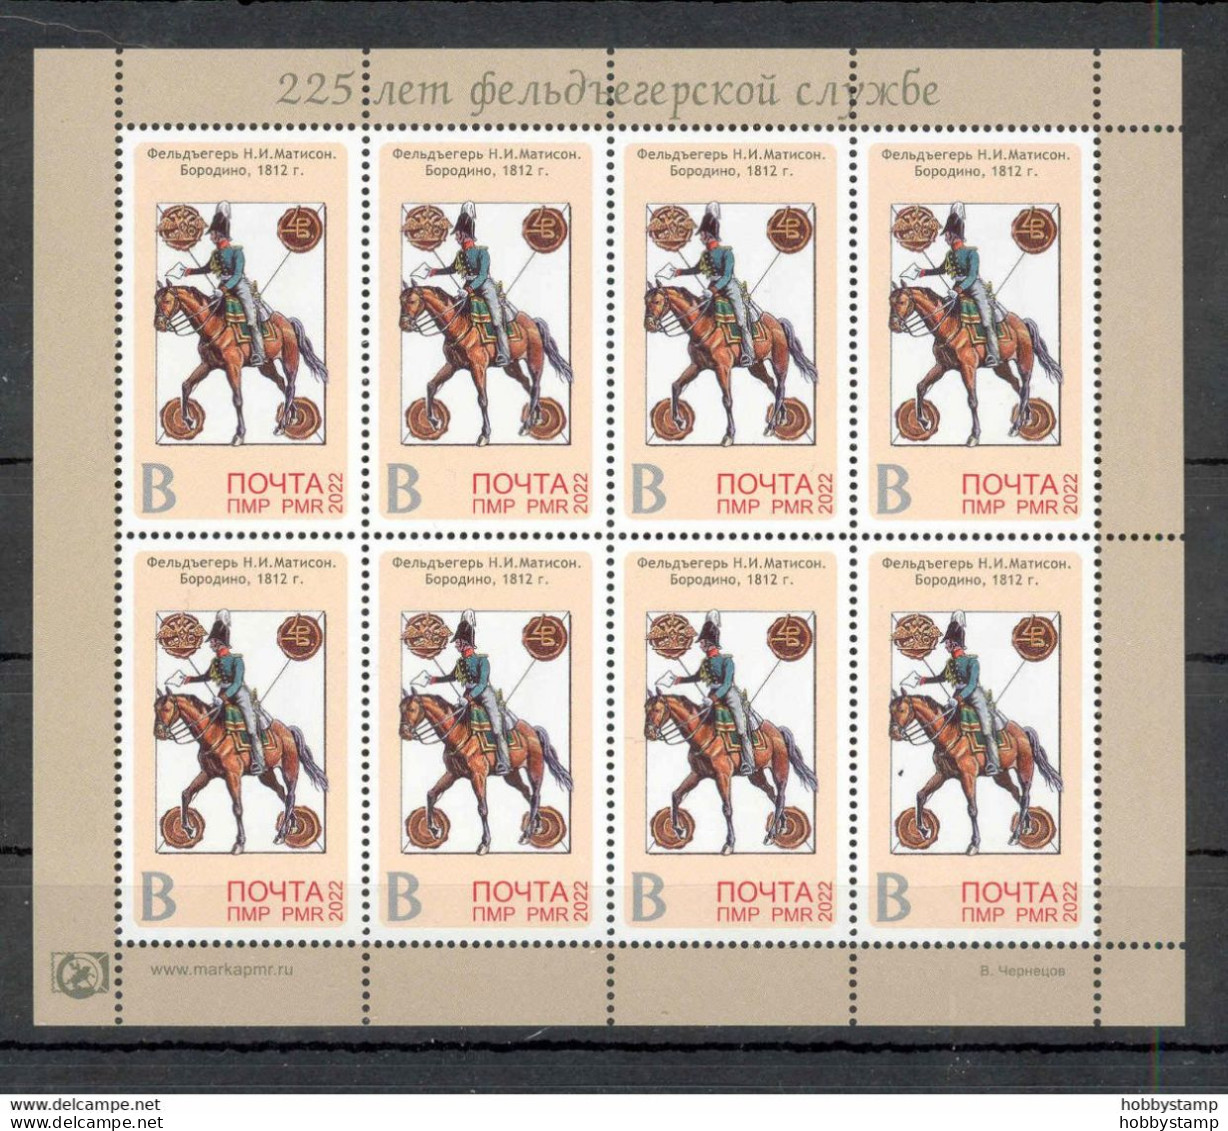 Label Transnistria 2022 225 Years Of Courier Military Service Sheetlet**MNH - Fantasie Vignetten